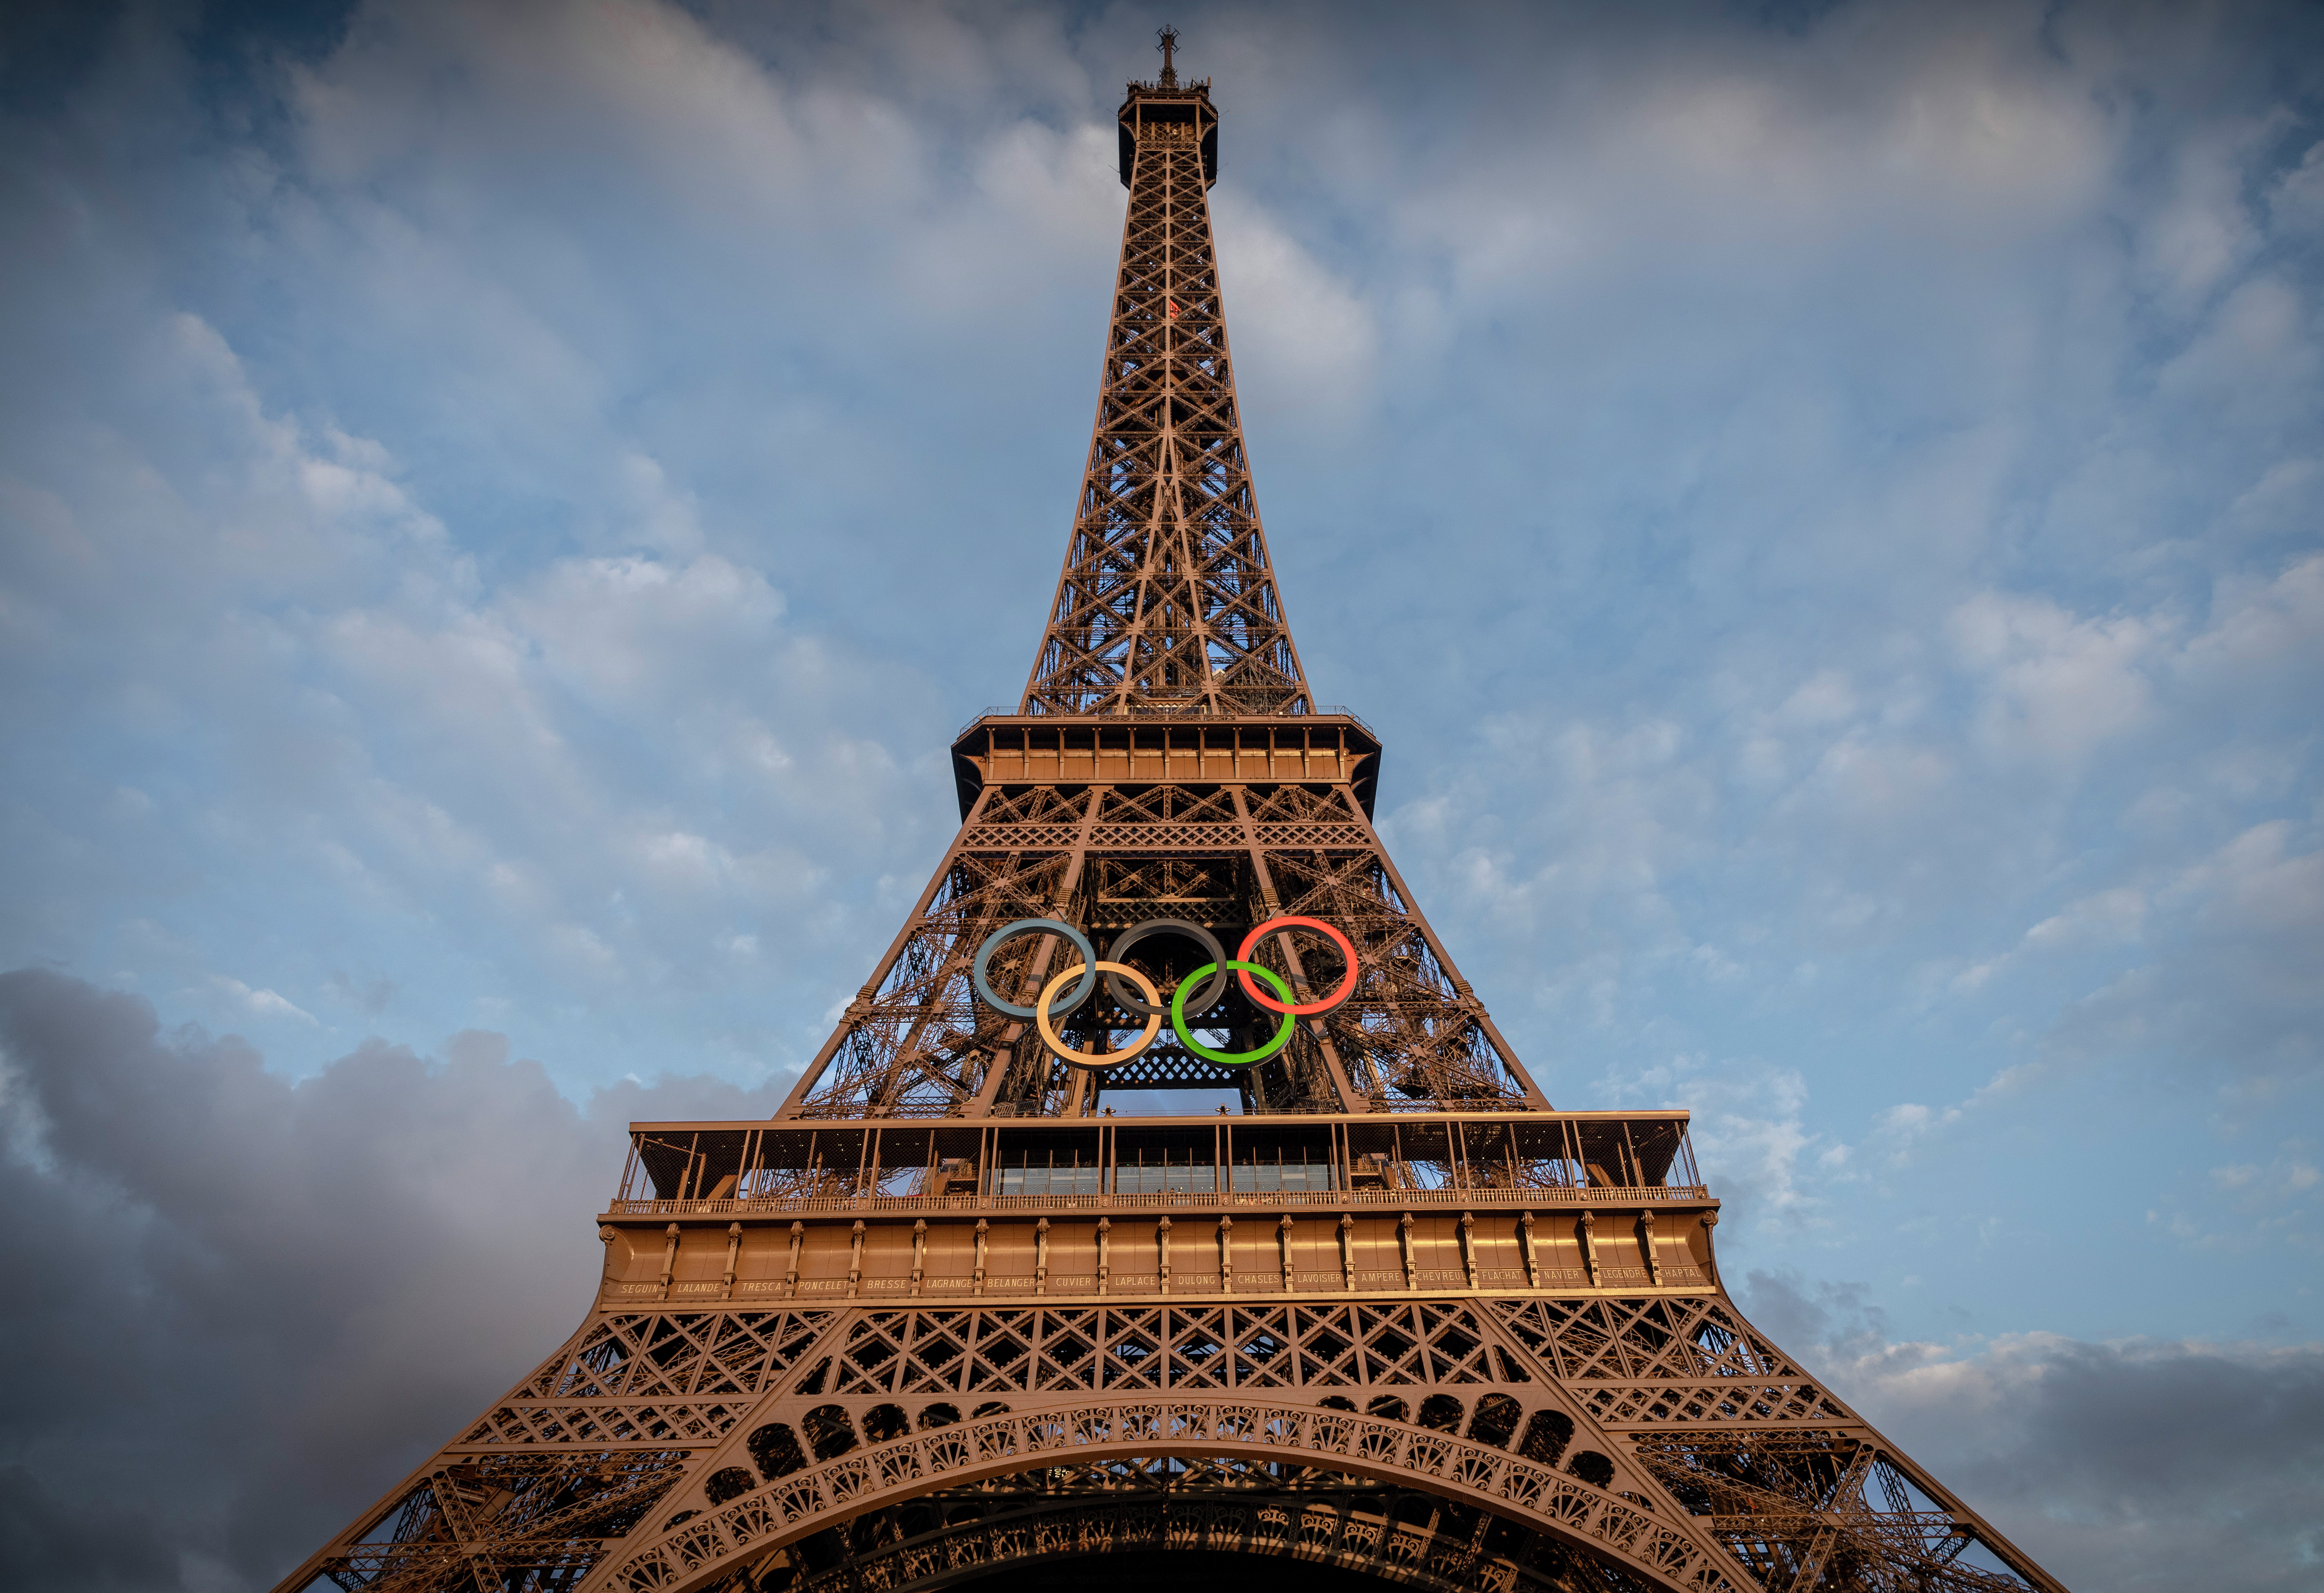 Trying to visit Paris? Consider waiting until after the Olympics